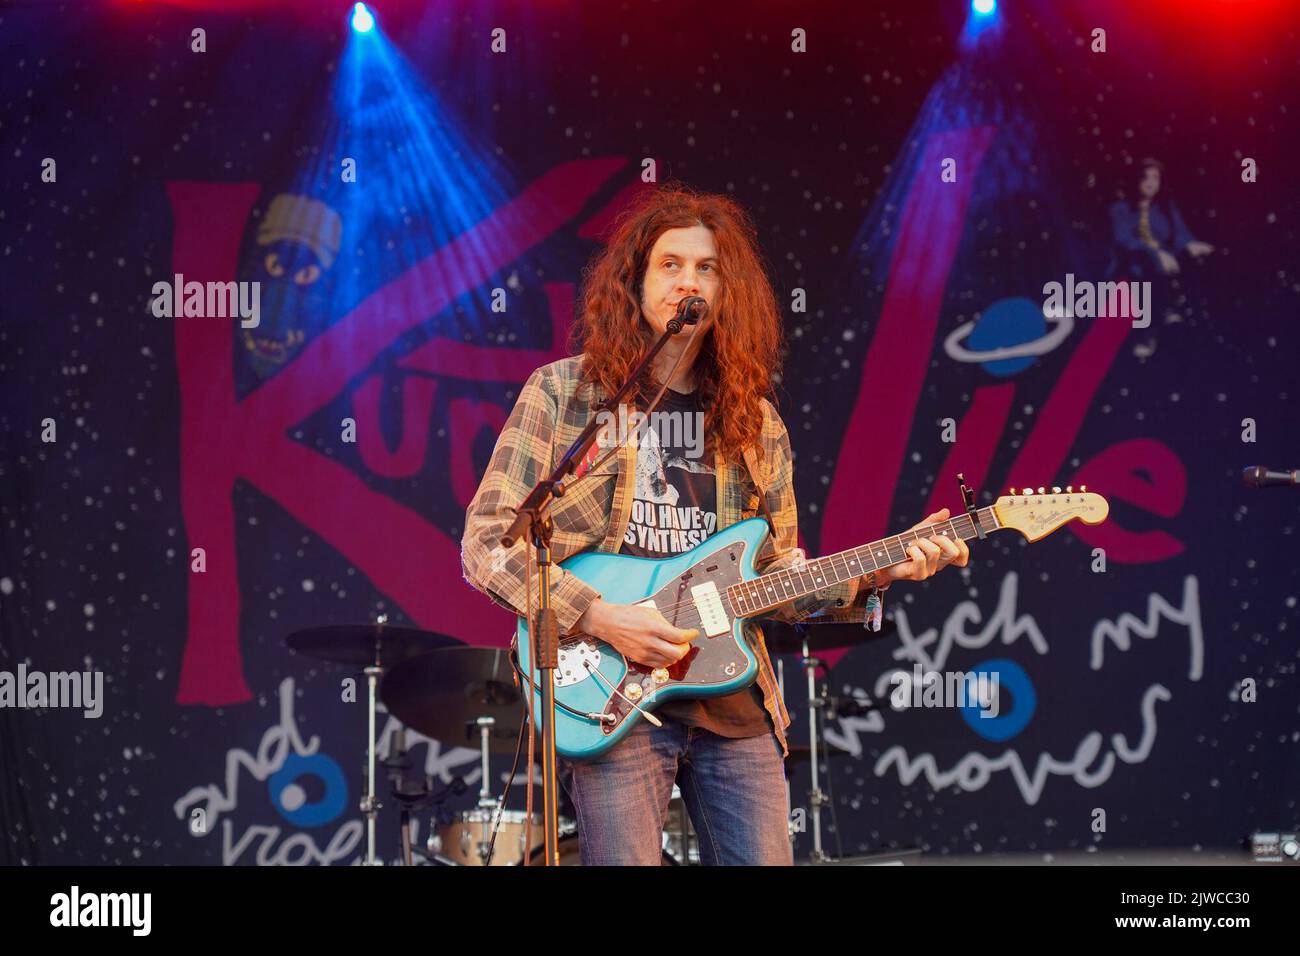 Dorset, UK. Sunday, 4 September, 2022. Kurt Vile and the Violators performing at the 2022 End of the Road Festival. Photo: Richard Gray/Alamy Stock Photo